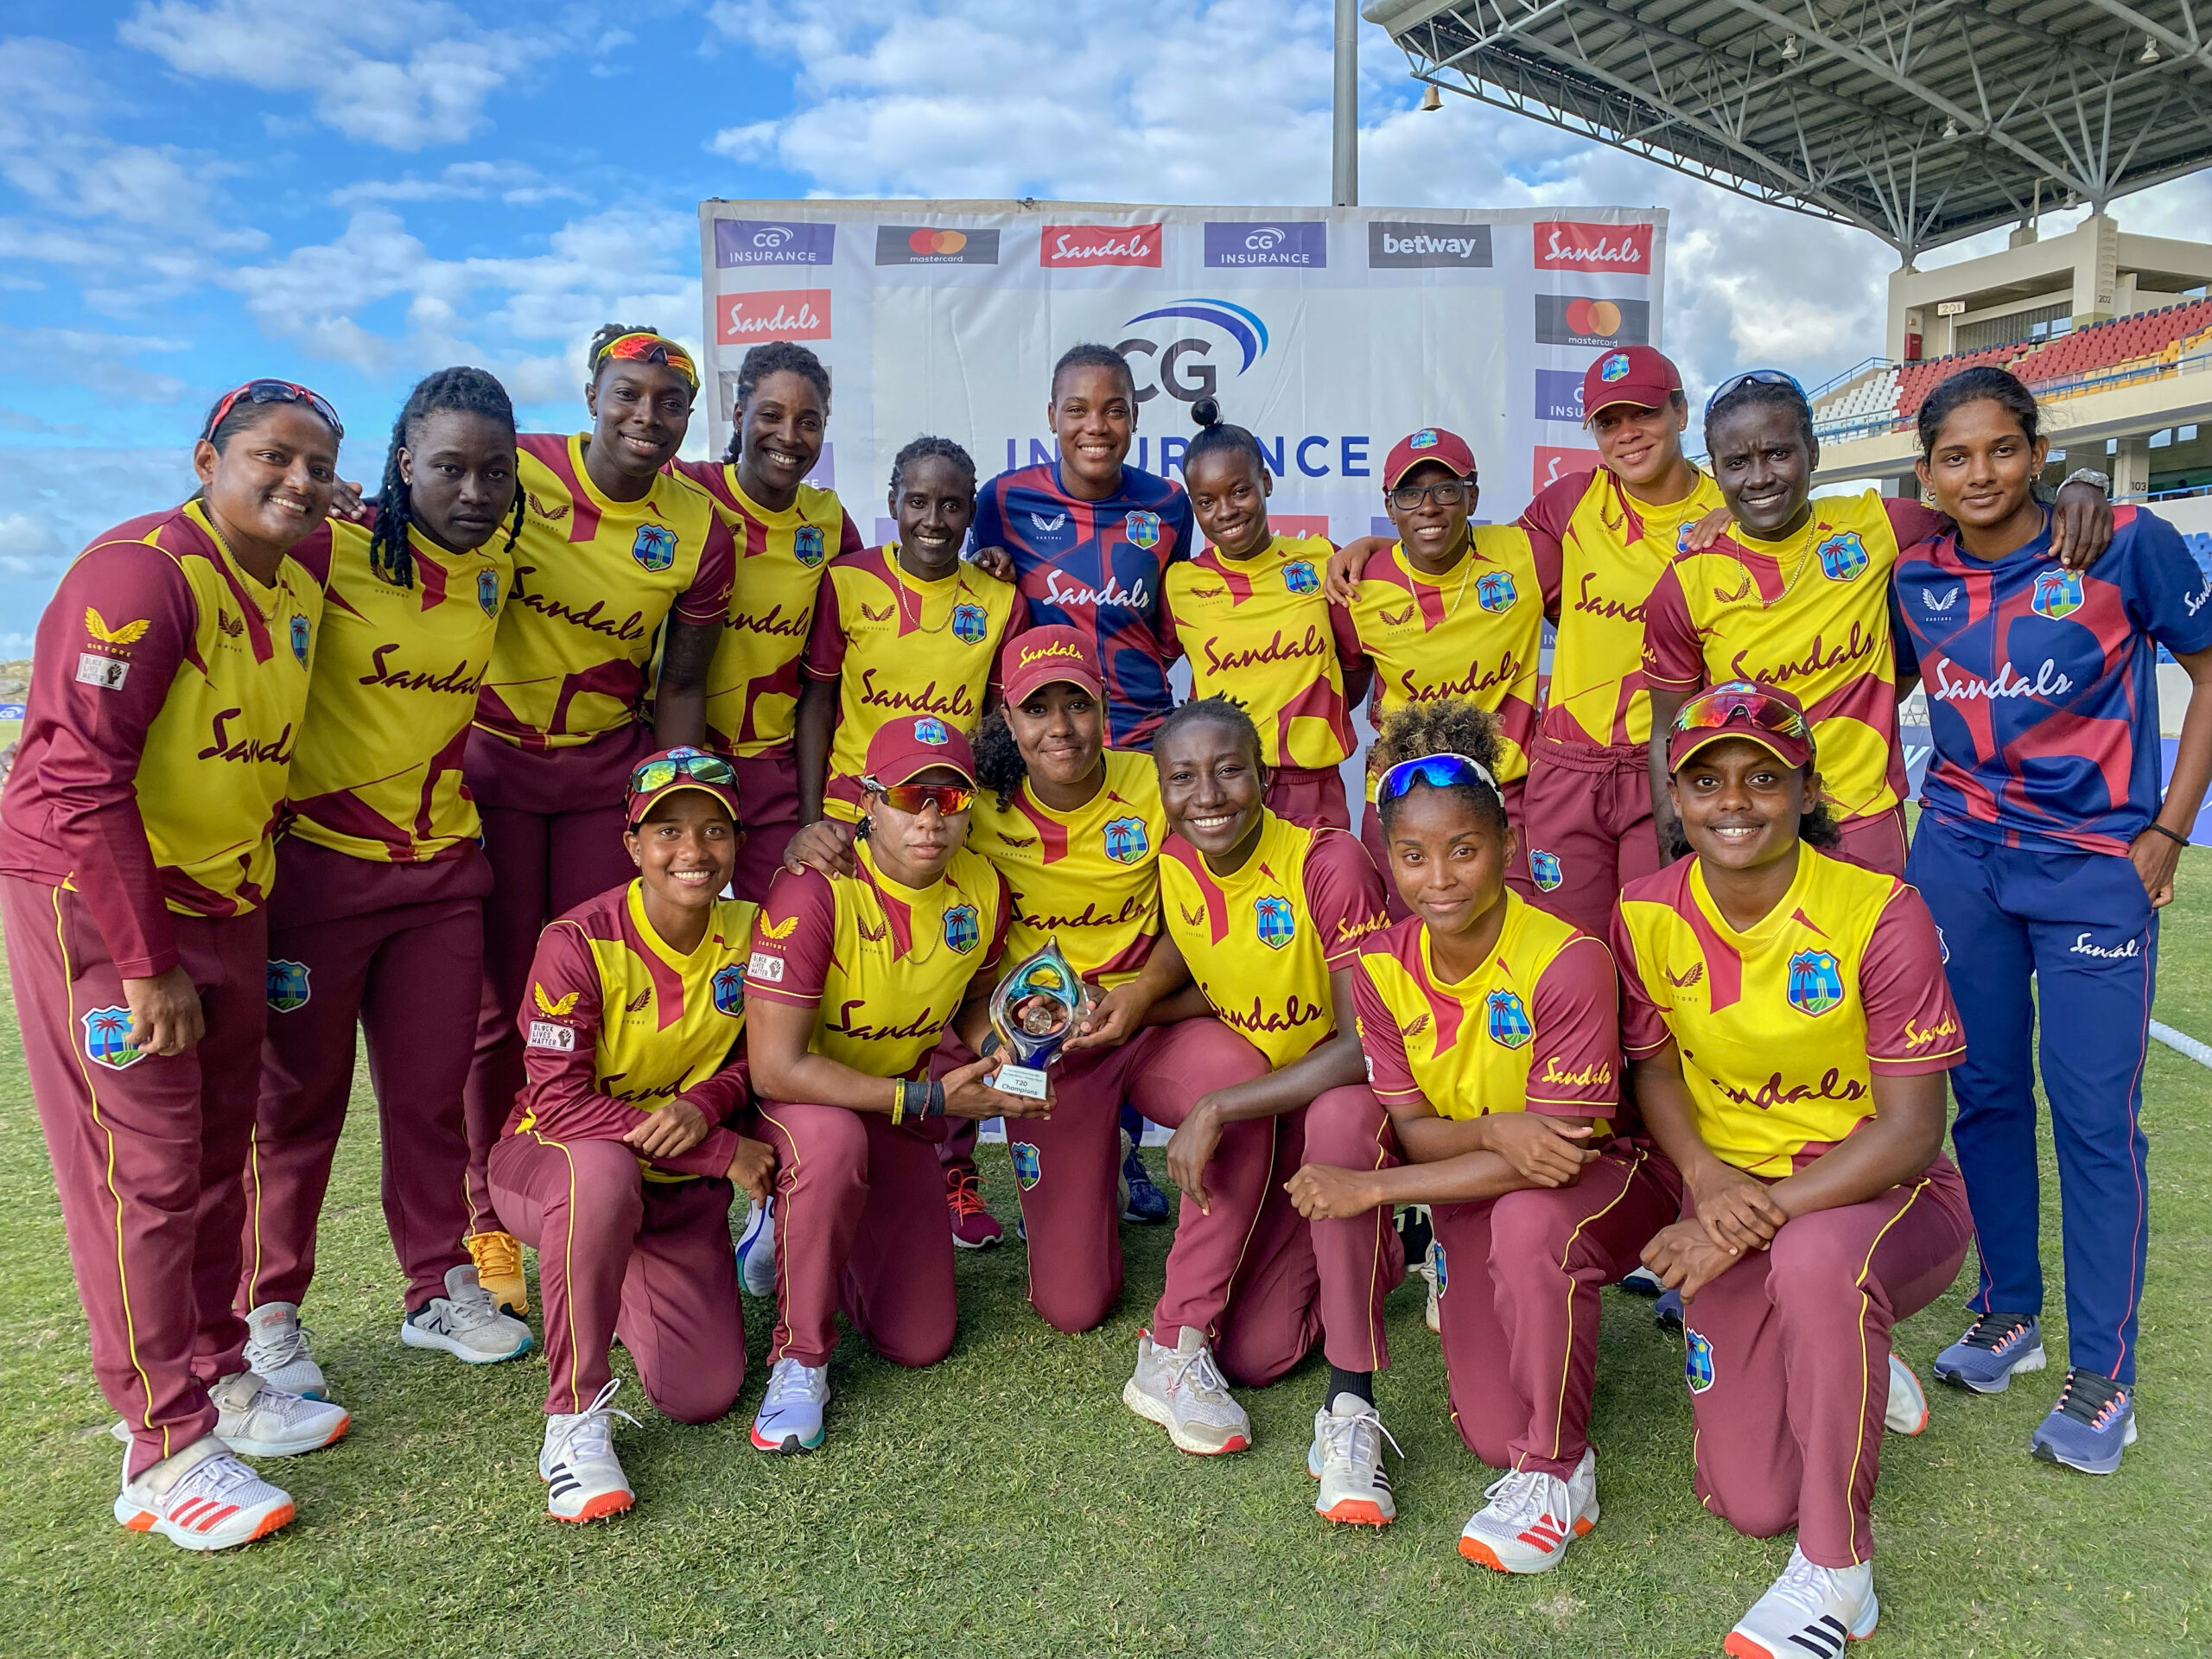 Taylor stars with bat and ball as West Indies Women make clean sweep of CG Insurance T20 International Series